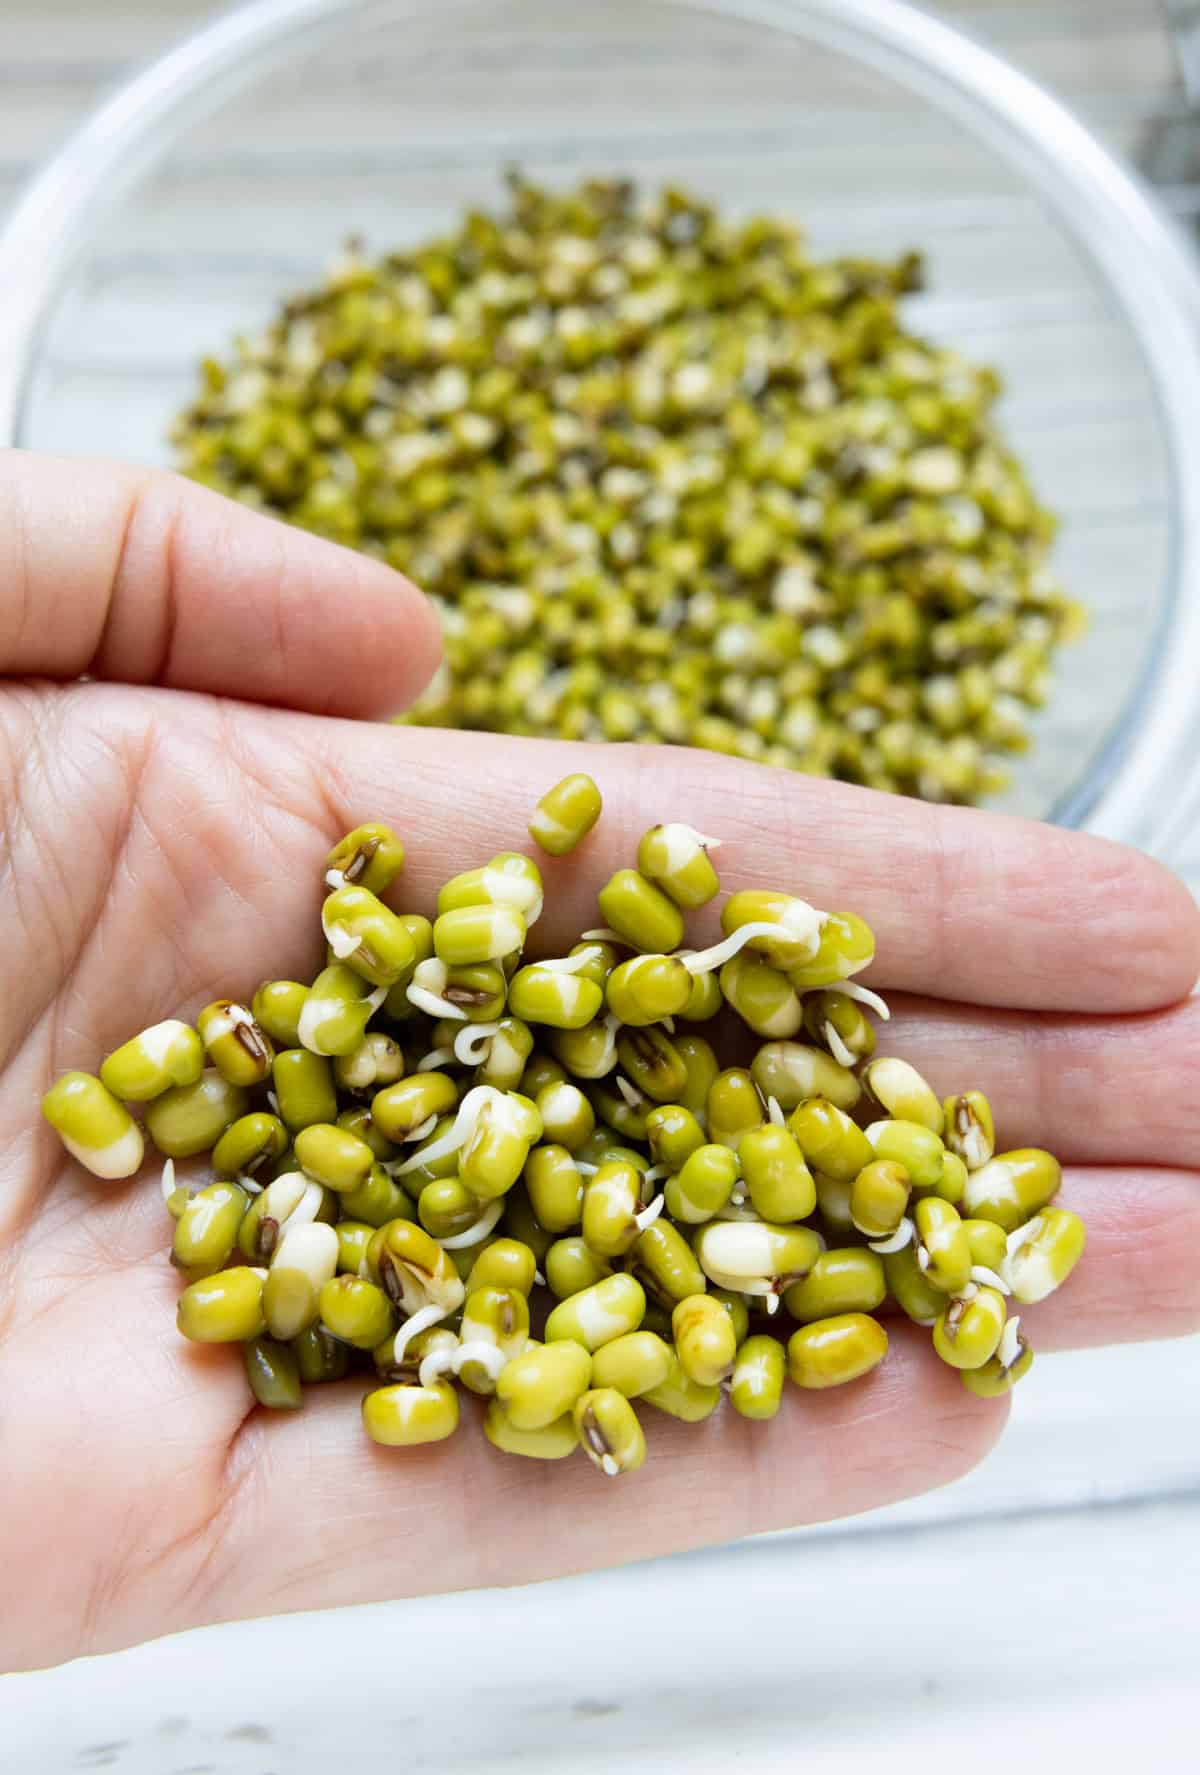 How to Sprout Mung Beans